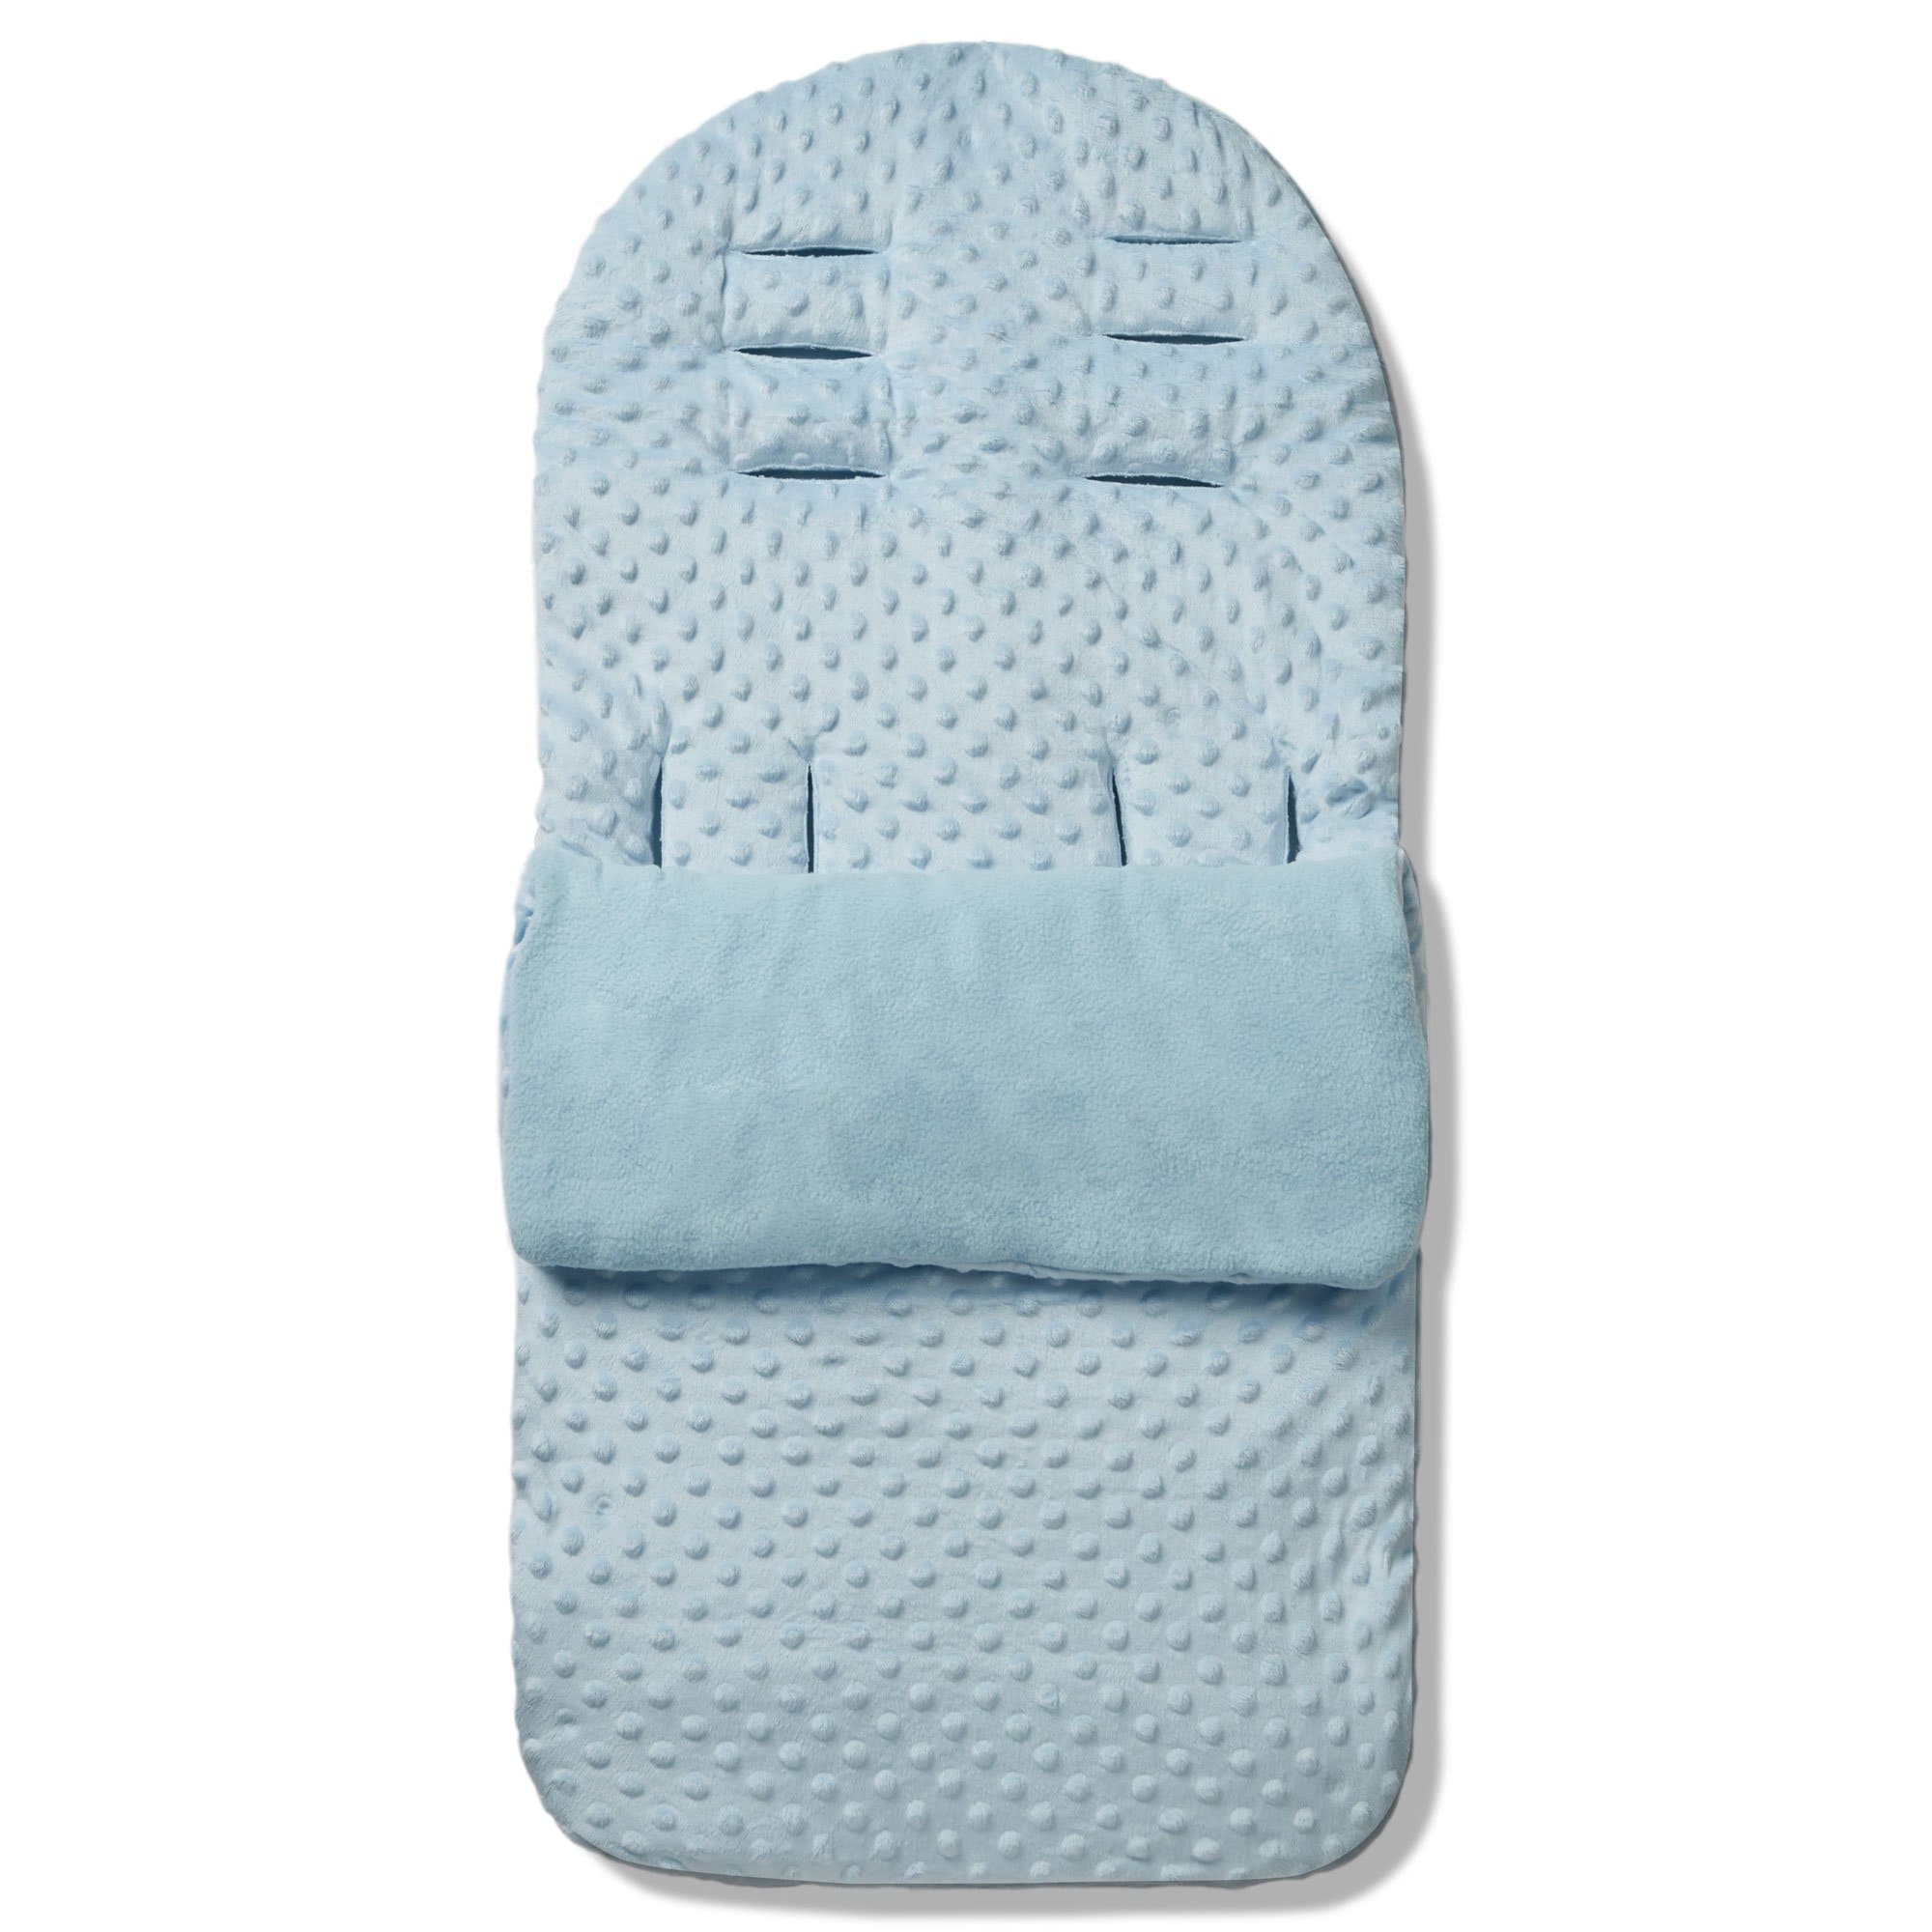 Dimple Footmuff / Cosy Toes Compatible with BabyStyle - Blue / Fits All Models | For Your Little One